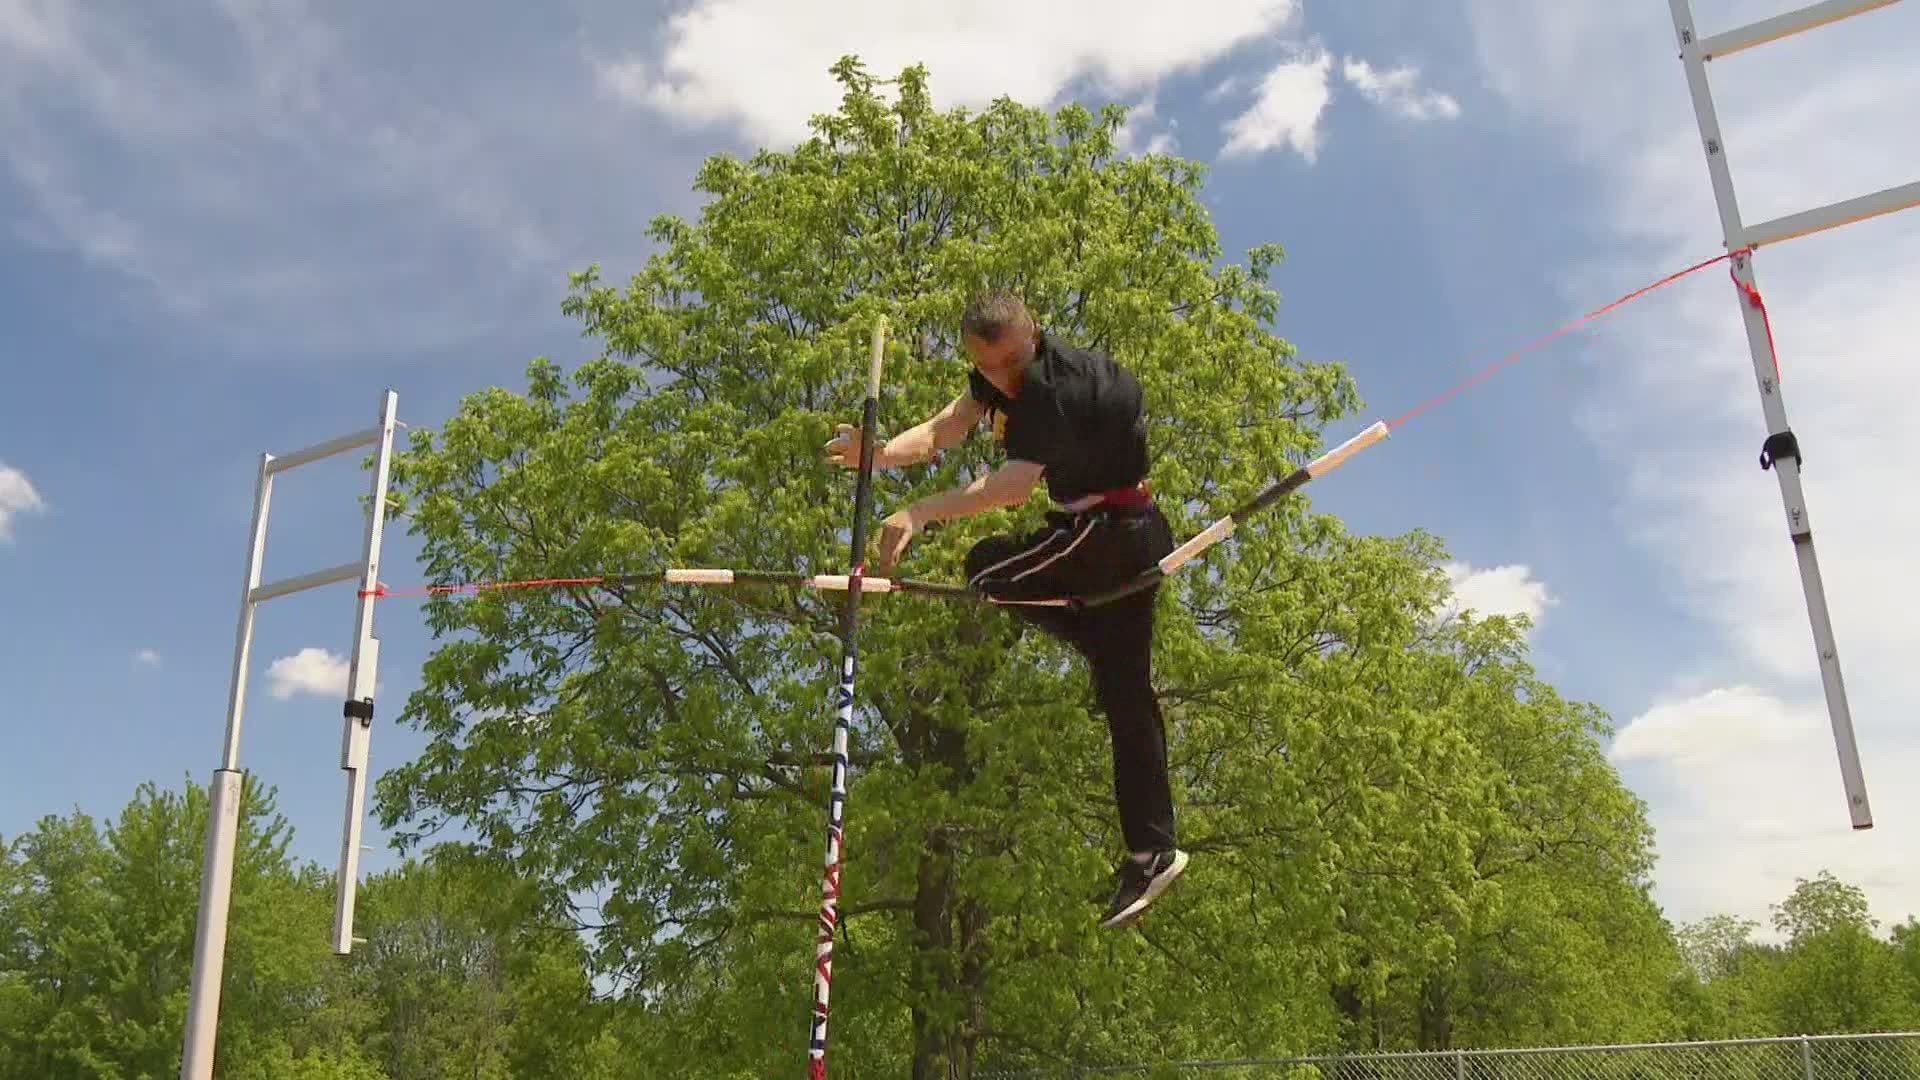 Michigan's Bradley Rainwater is doing something nobody else known ever has. He competes in the pole vault while at the same time being completely blind.